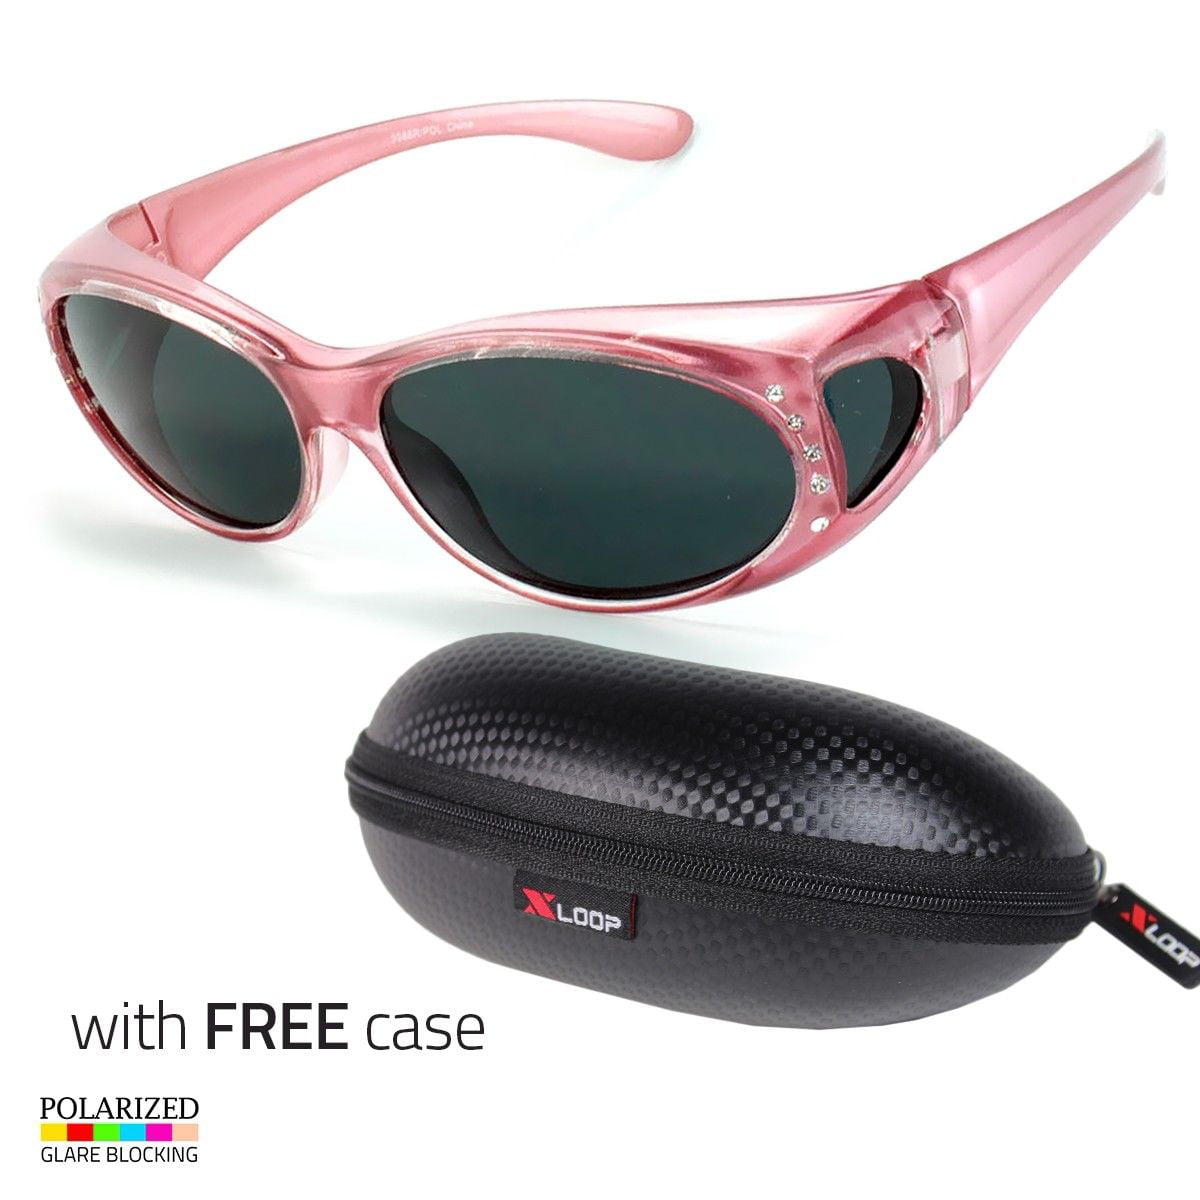 2 PAIR POLARIZED Rhinestone cover put over Sunglasses wear Rx glass driving Pink 